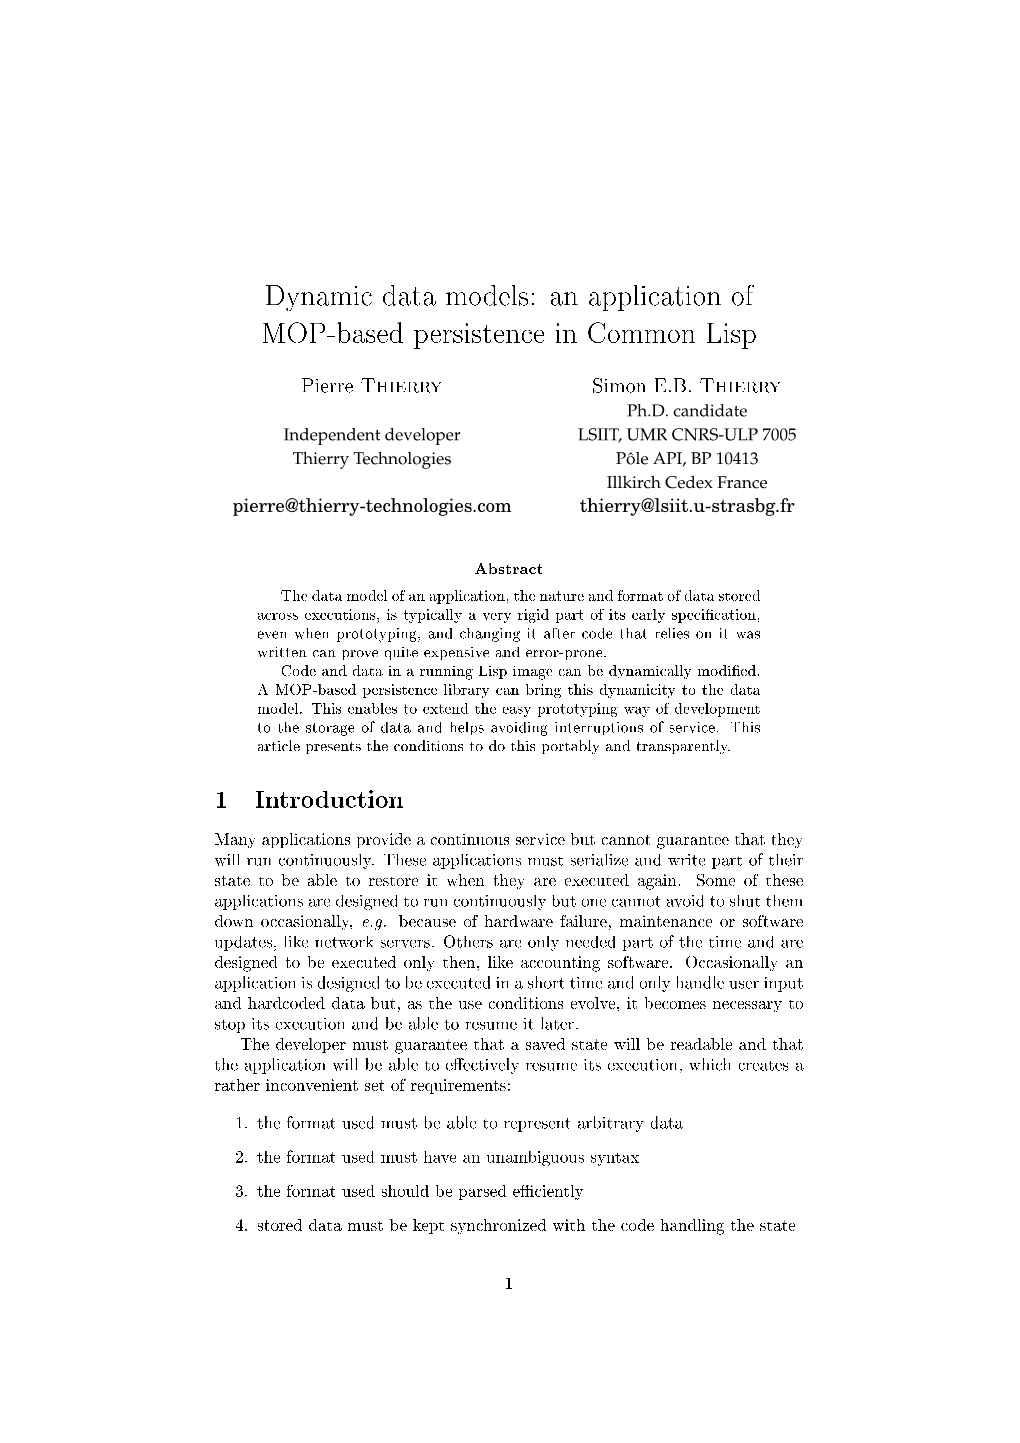 Dynamic Data Models: an Application of MOP-Based Persistence in Common Lisp 1 Introduction